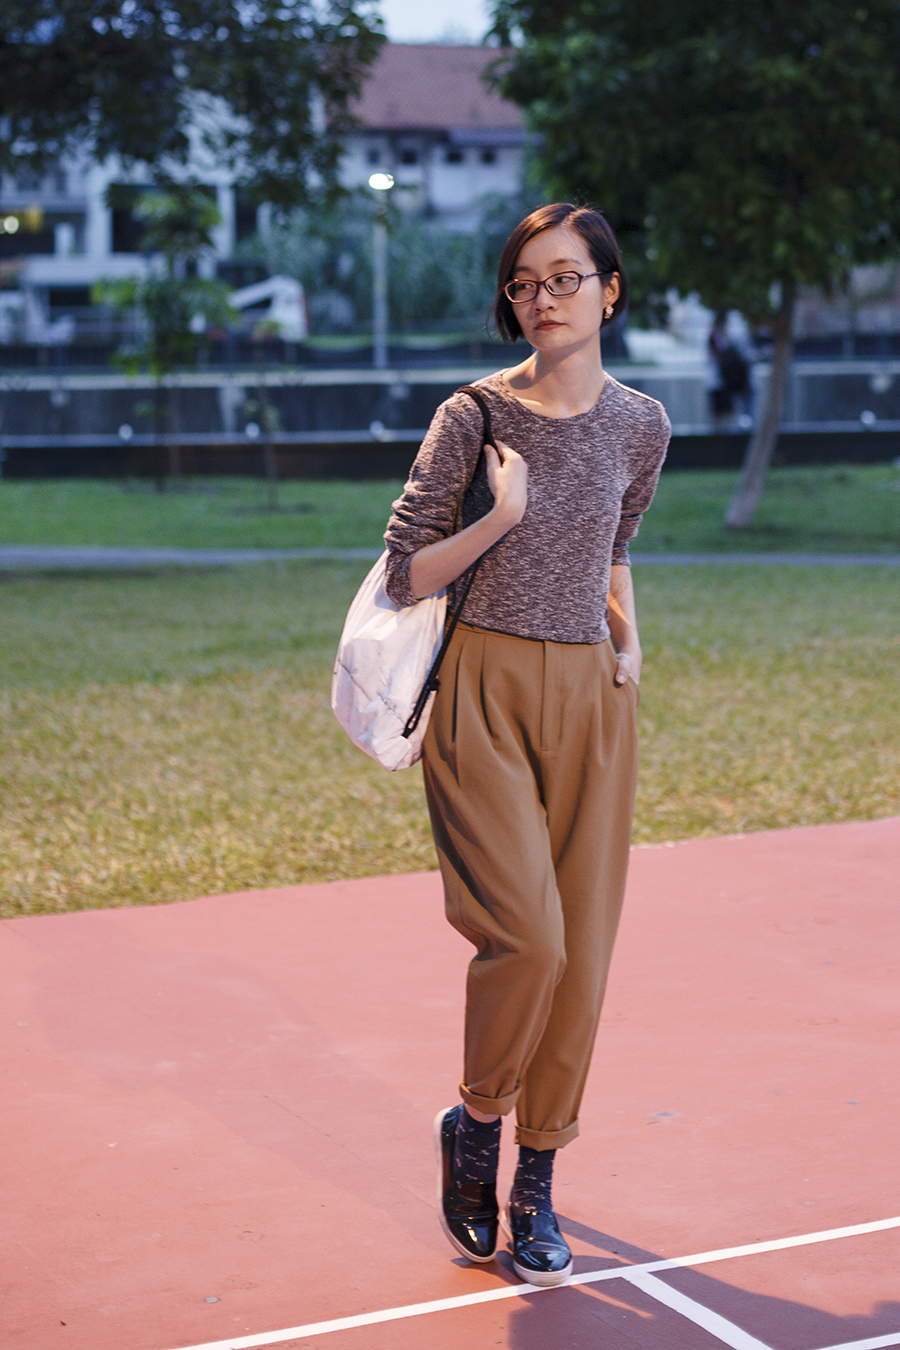 Forever 21 heather grey cropped sweater, GU pants, Zalora shoes, Firmoo glasses, Snupped drawstring bag.